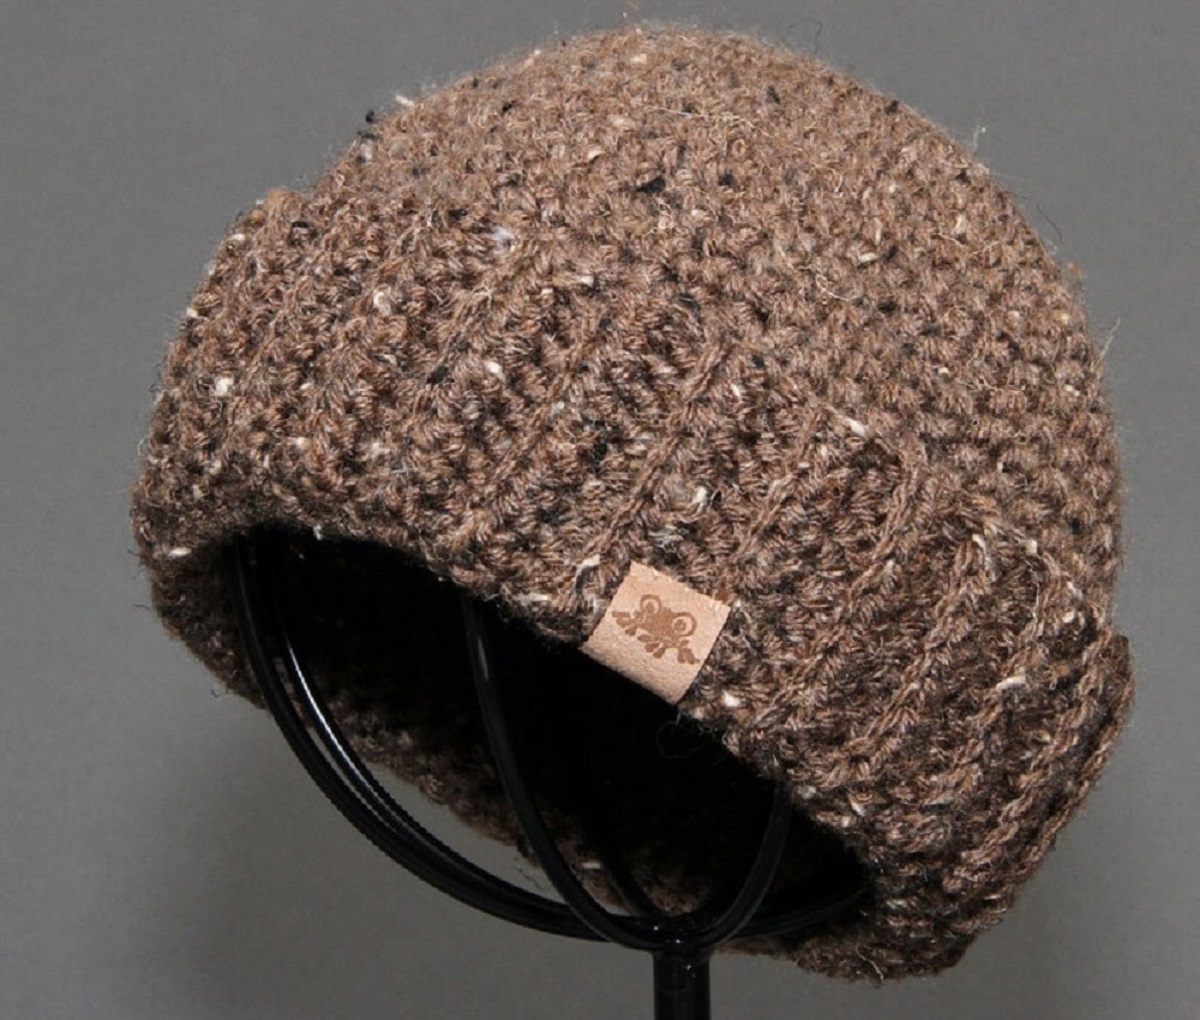 Brown and white speckled crochet beanie sitting on a black metal display unit with a gray background.